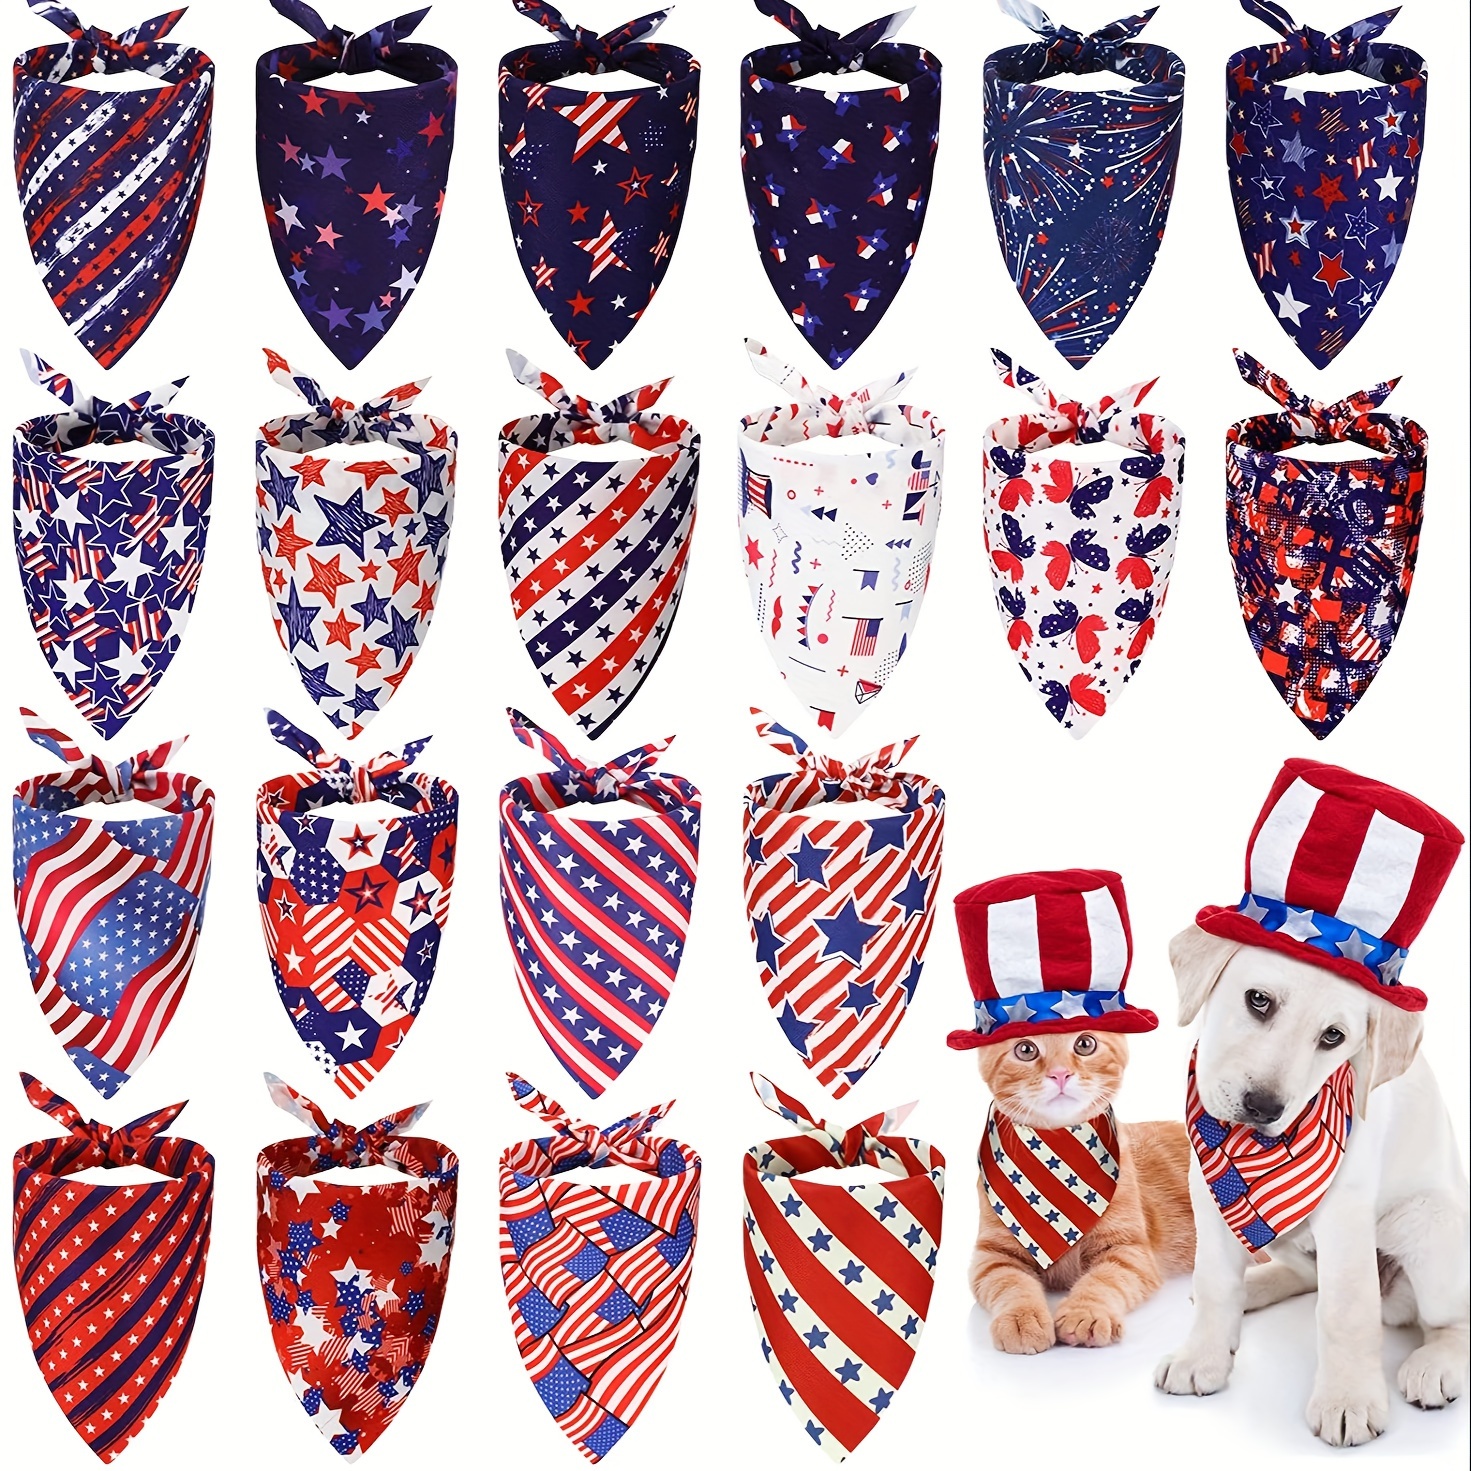 

20pcs Dog Bandanas, Patriotic Dog Bibs, Independence Day Triangle Pet Scarves, Adjustable Holiday Dog Bandanas For Small Medium Sized Dogs Puppies Cats Pets